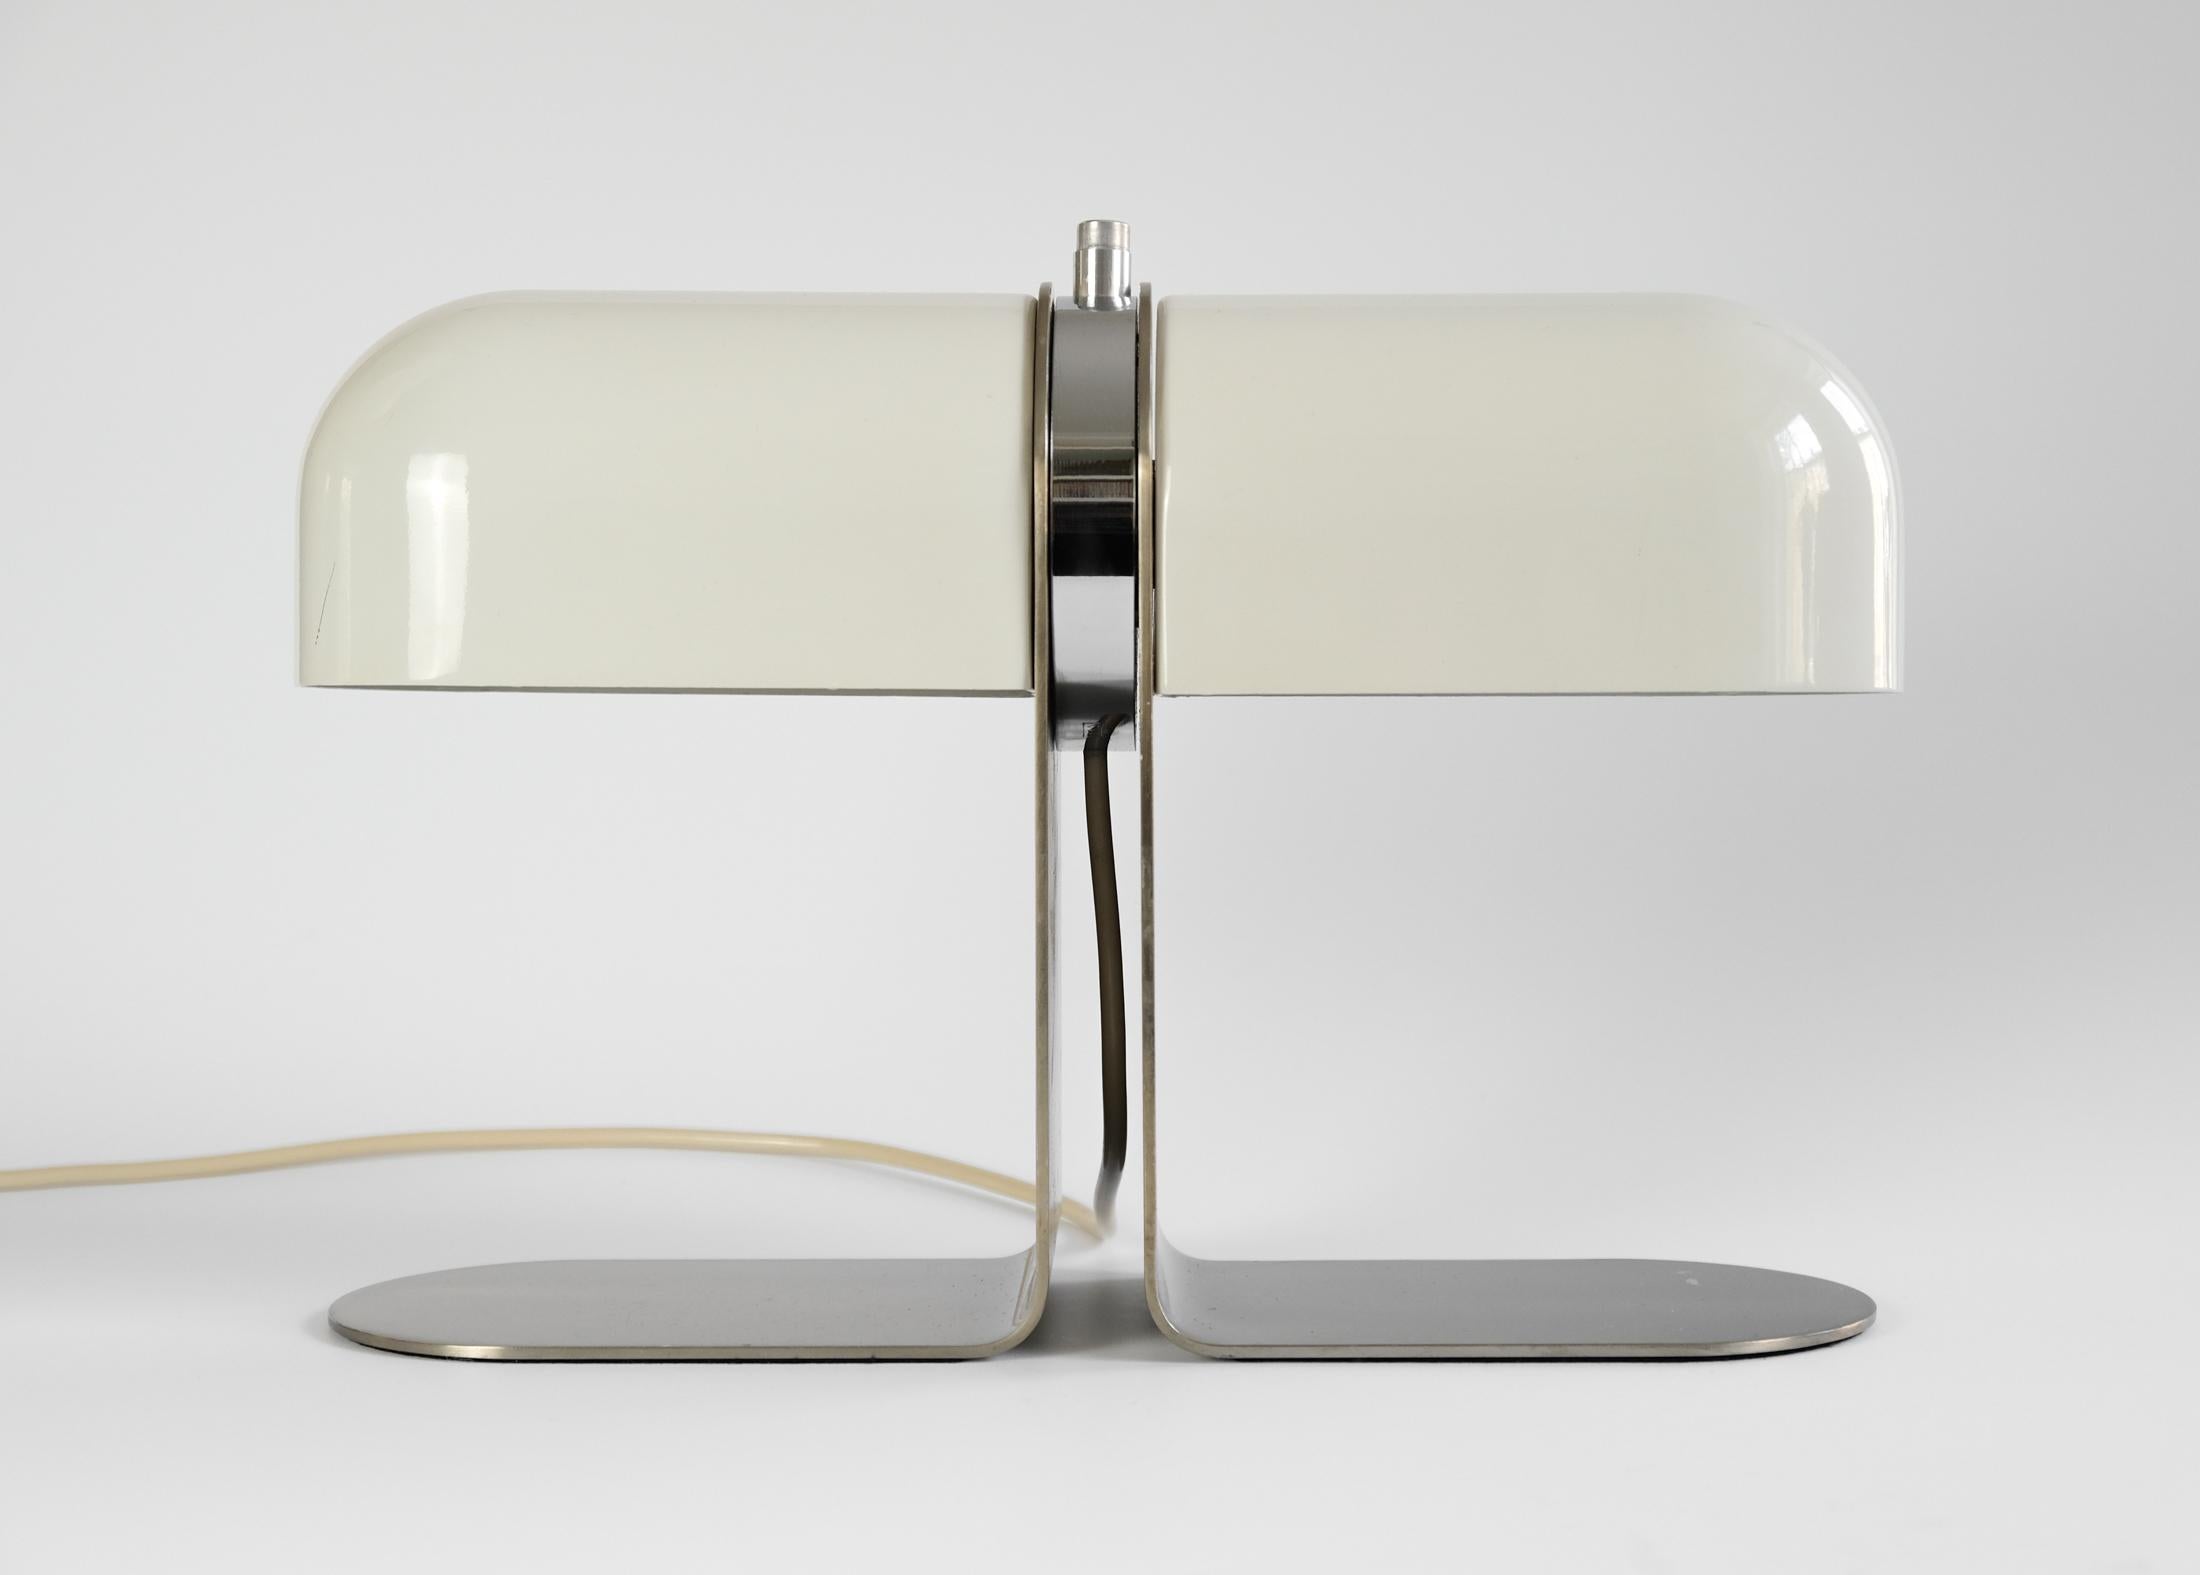 For sale is an early example of this rare table lamp by André Ricard, for METALARTE, Spain, circa the early 1970s.

The lamp consists of a rotating head comprised of a circular chrome block, with a mounted switch and flanked by two metal shades, all